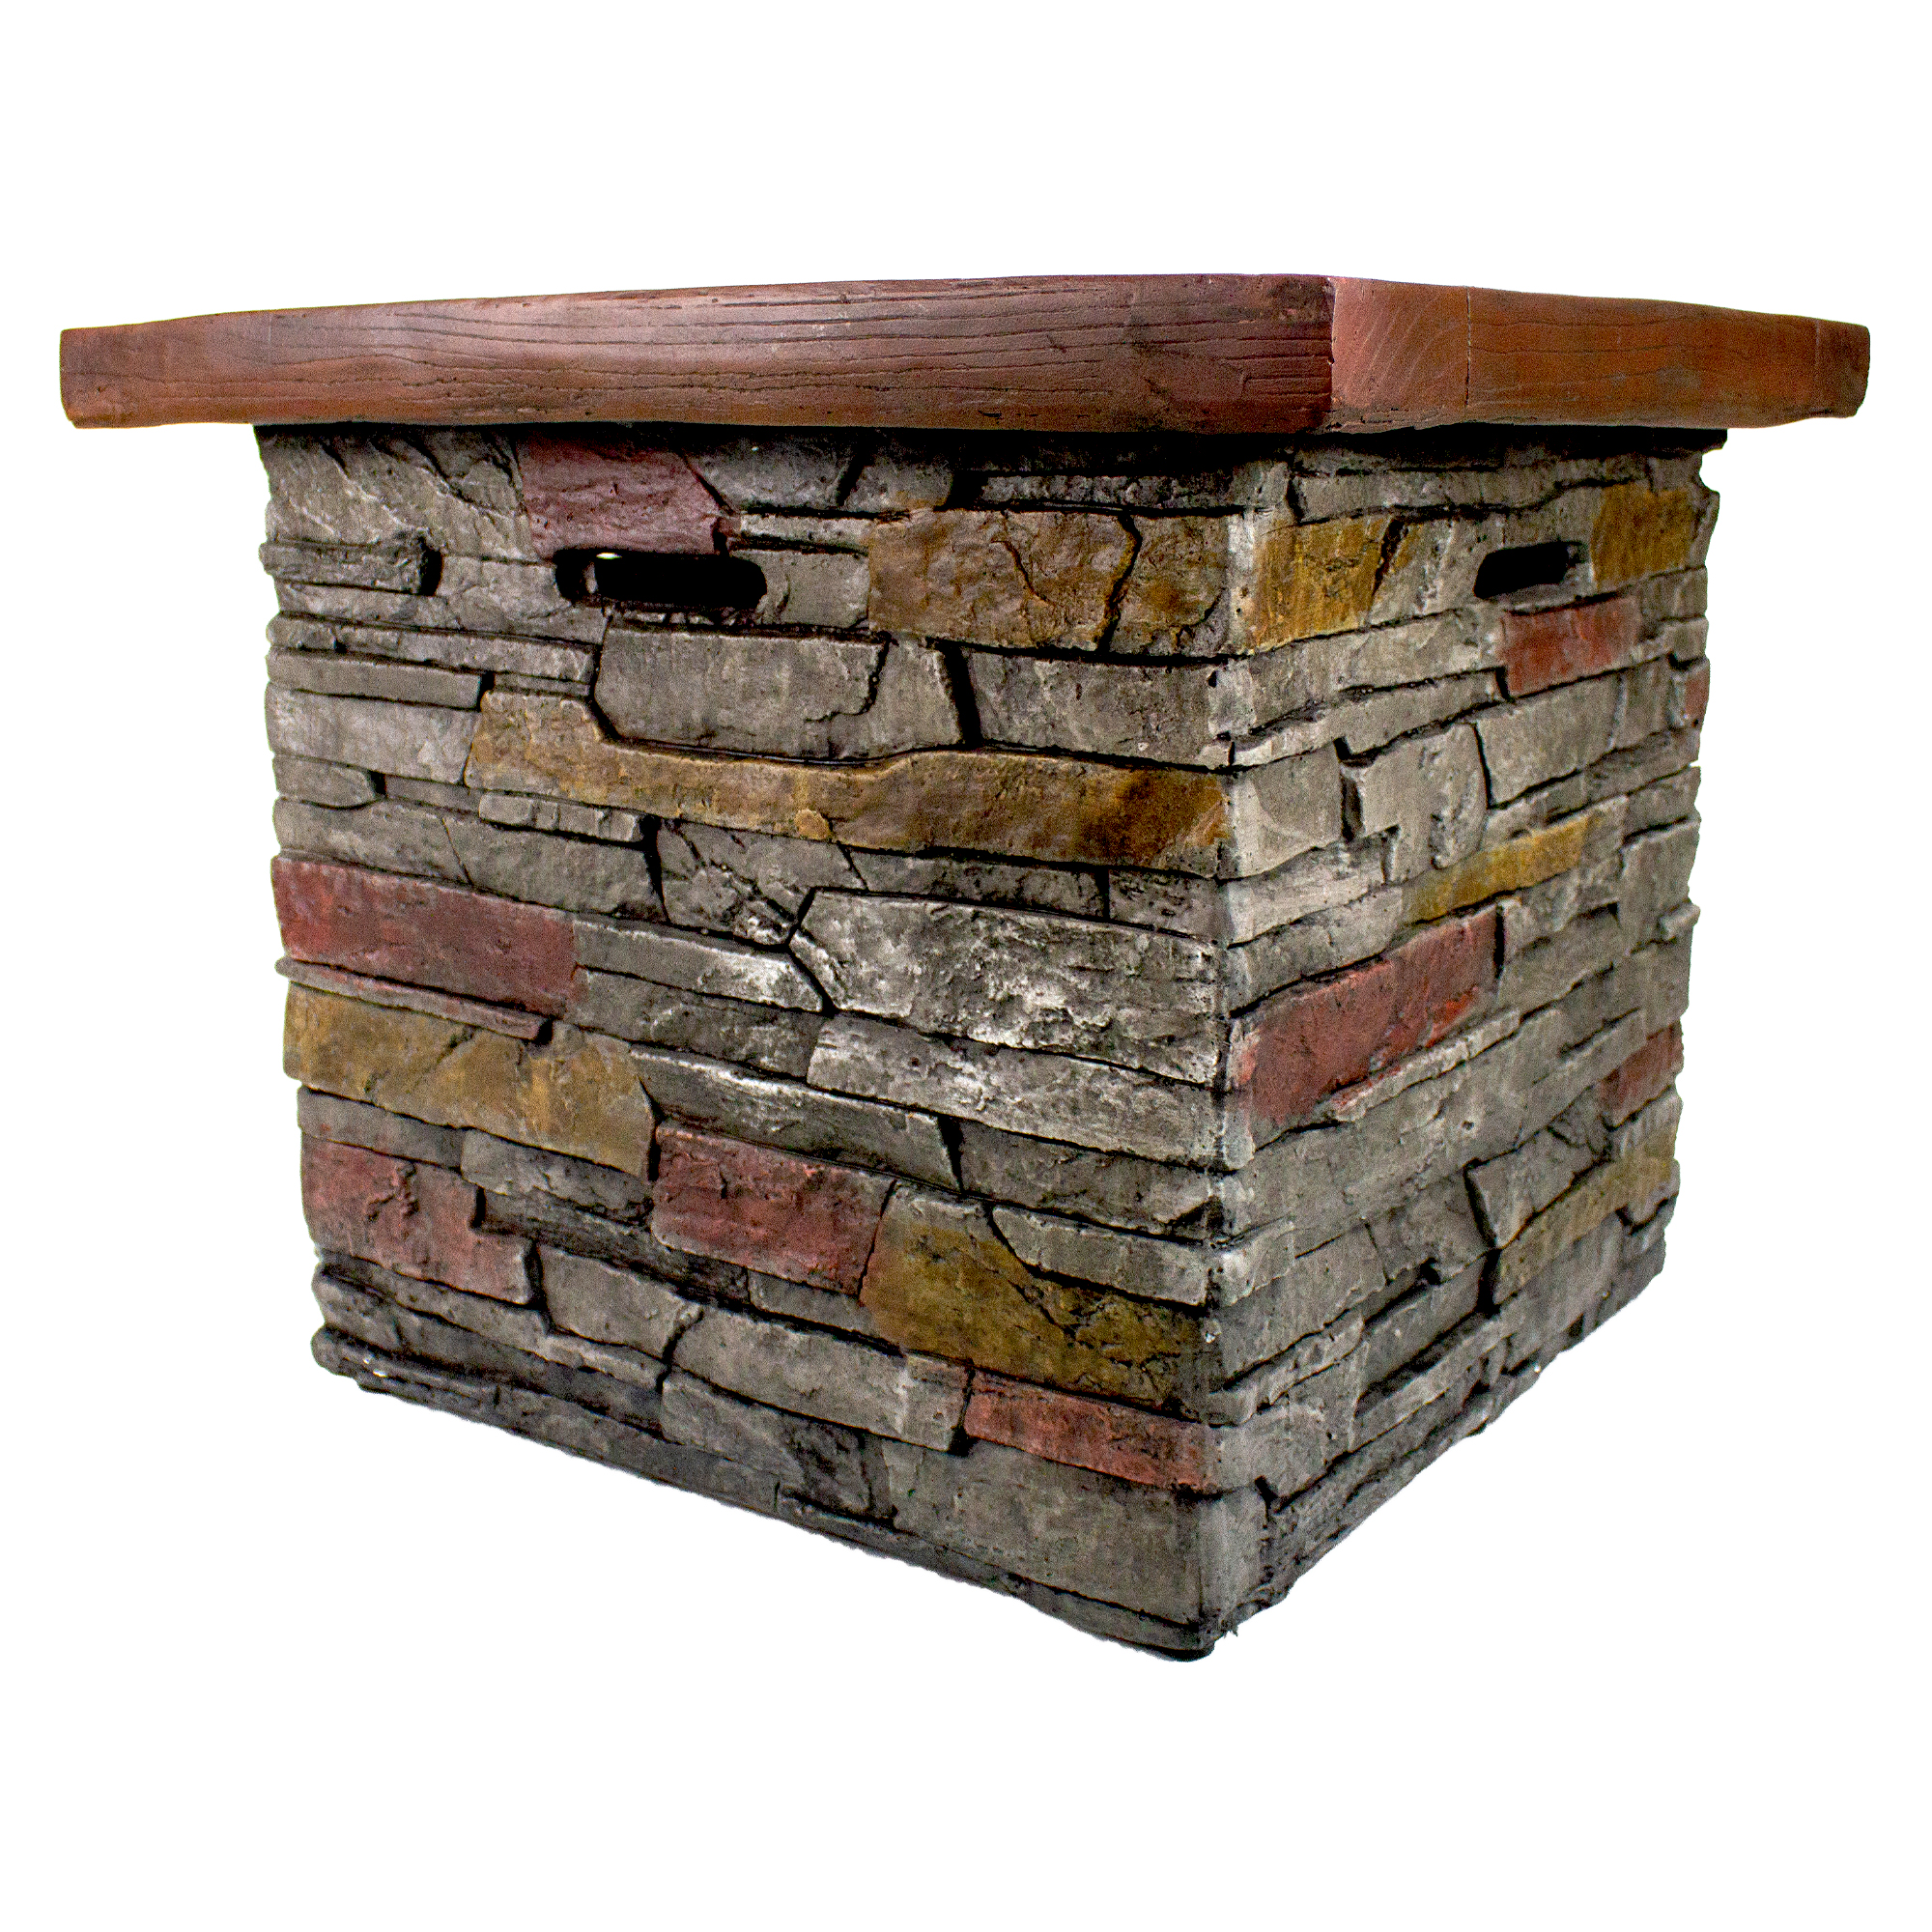 Northlight 30.25" Classic Stone Square Gas Fire Pit